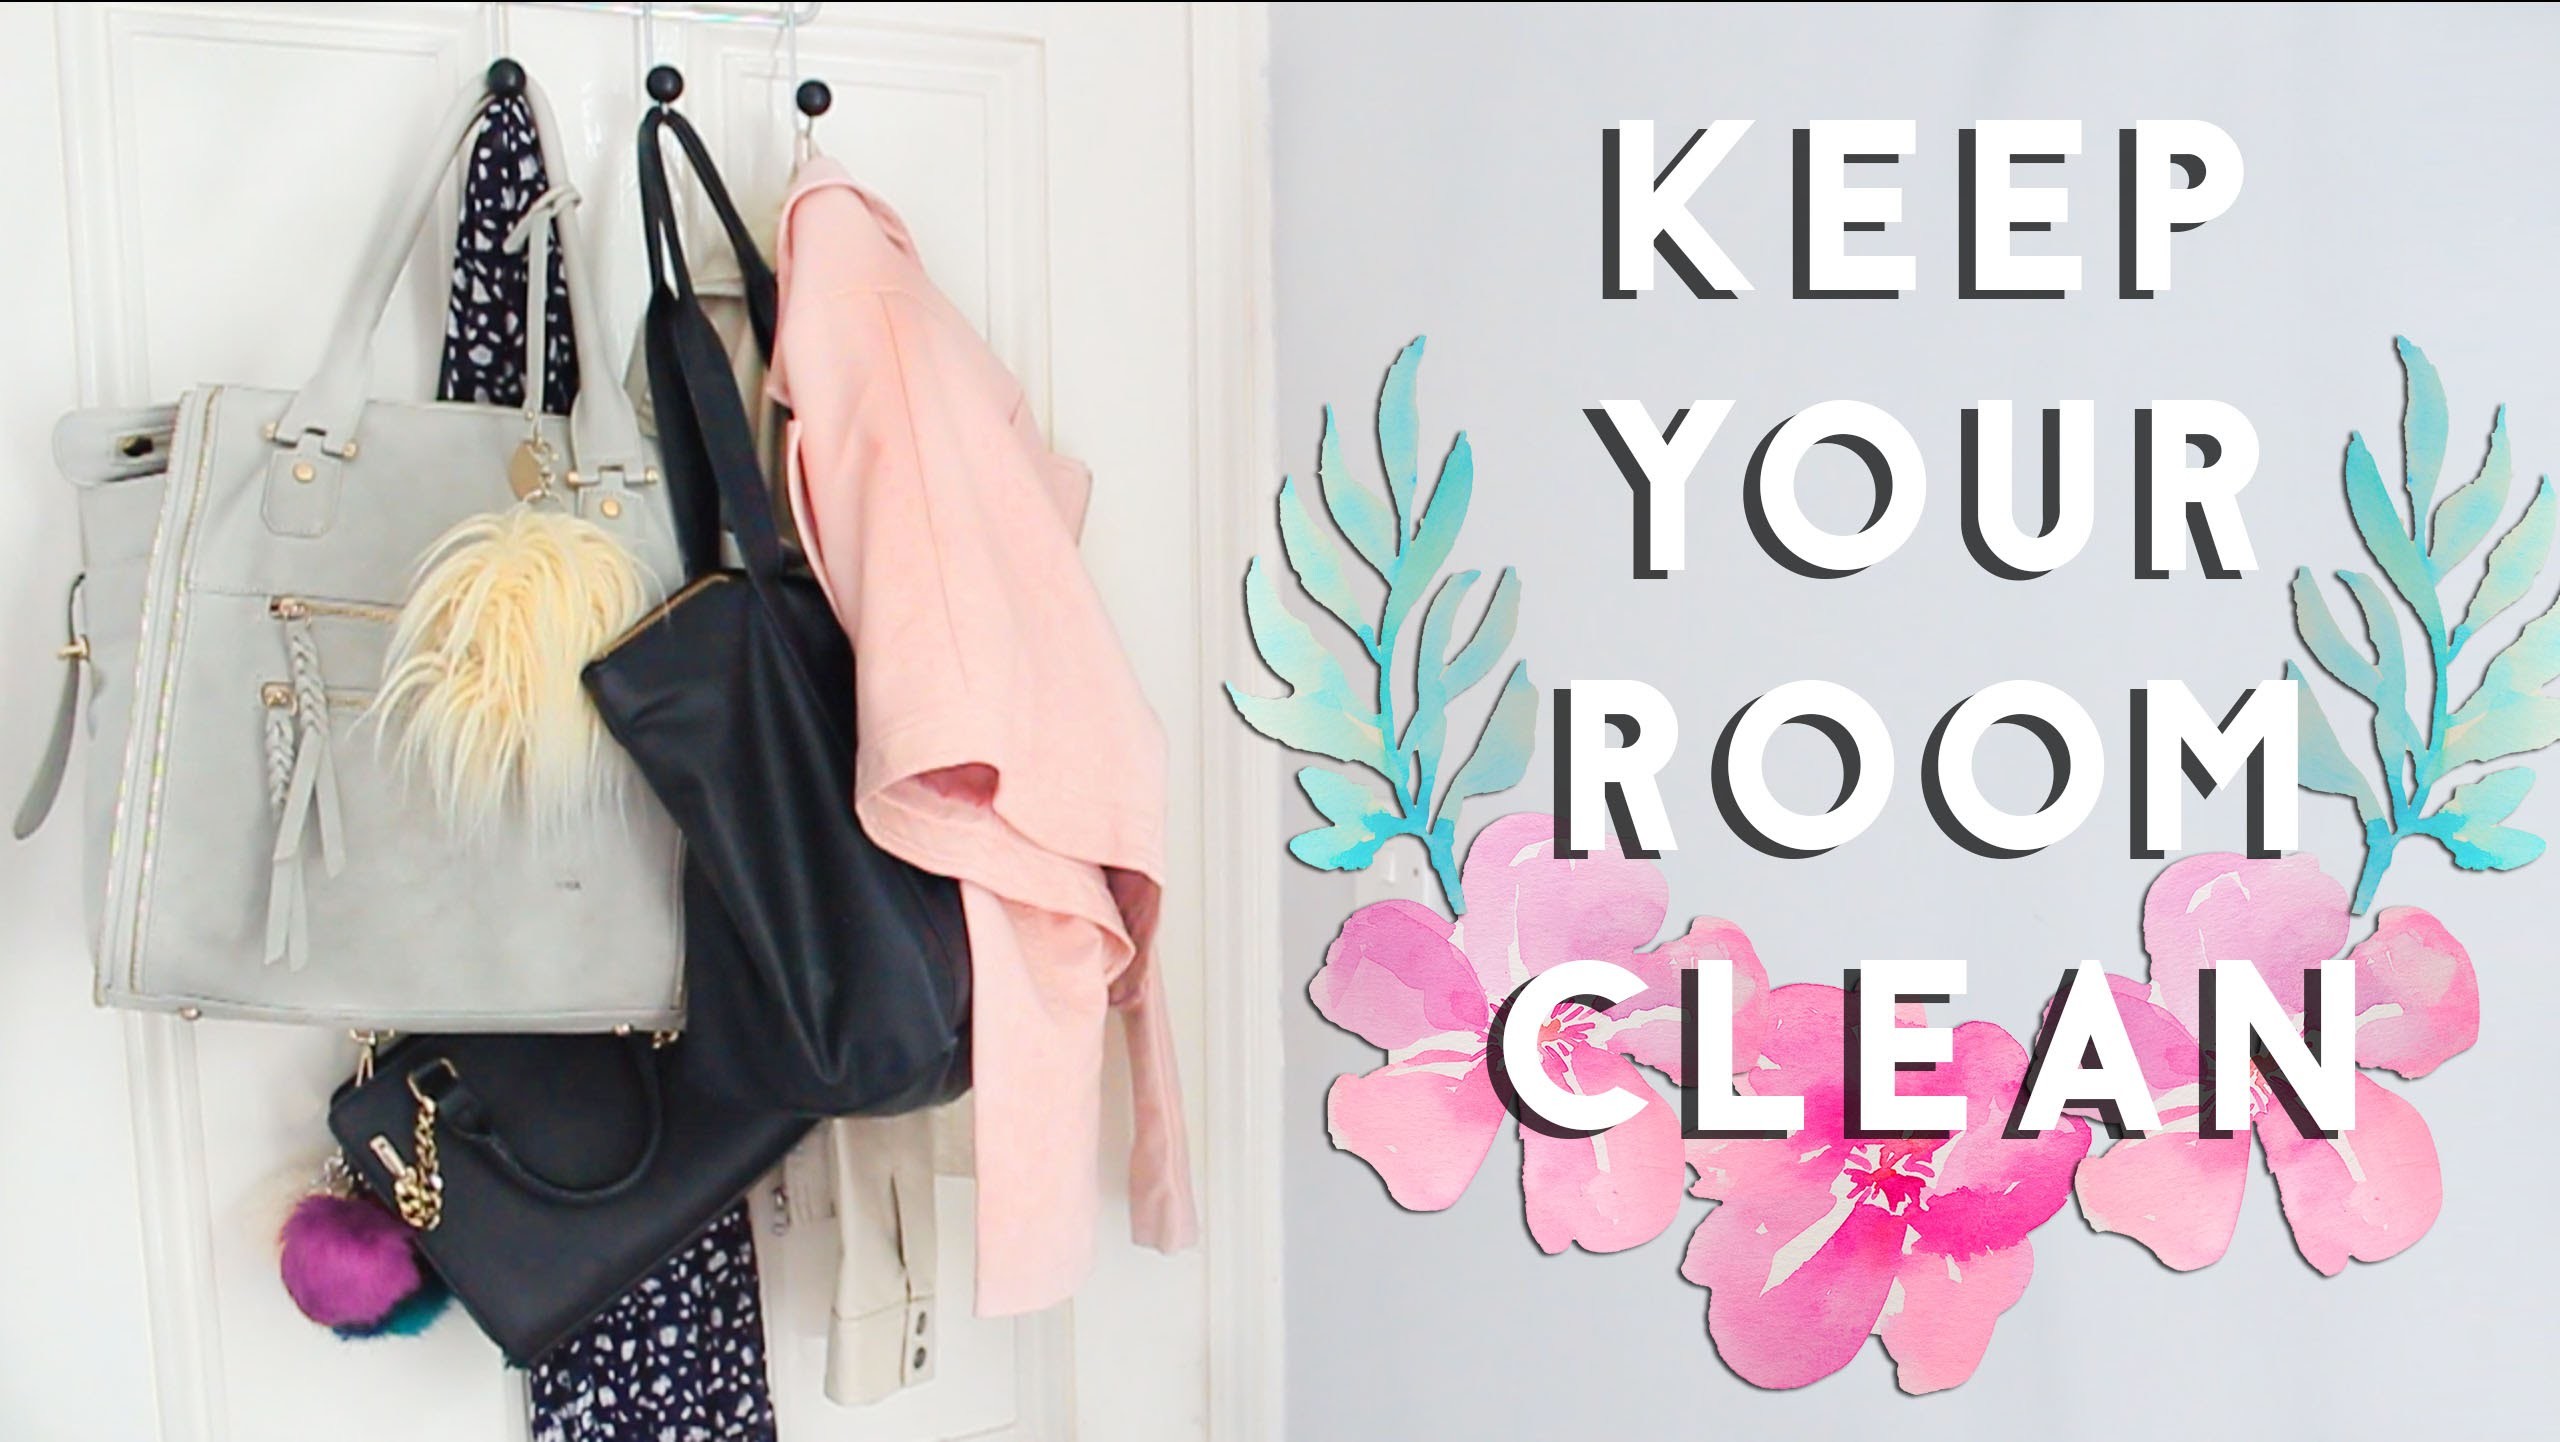 Clean and tidy. Clean your Room. Keep your Room tidy. Keep your House clean. Keep this Room clean.